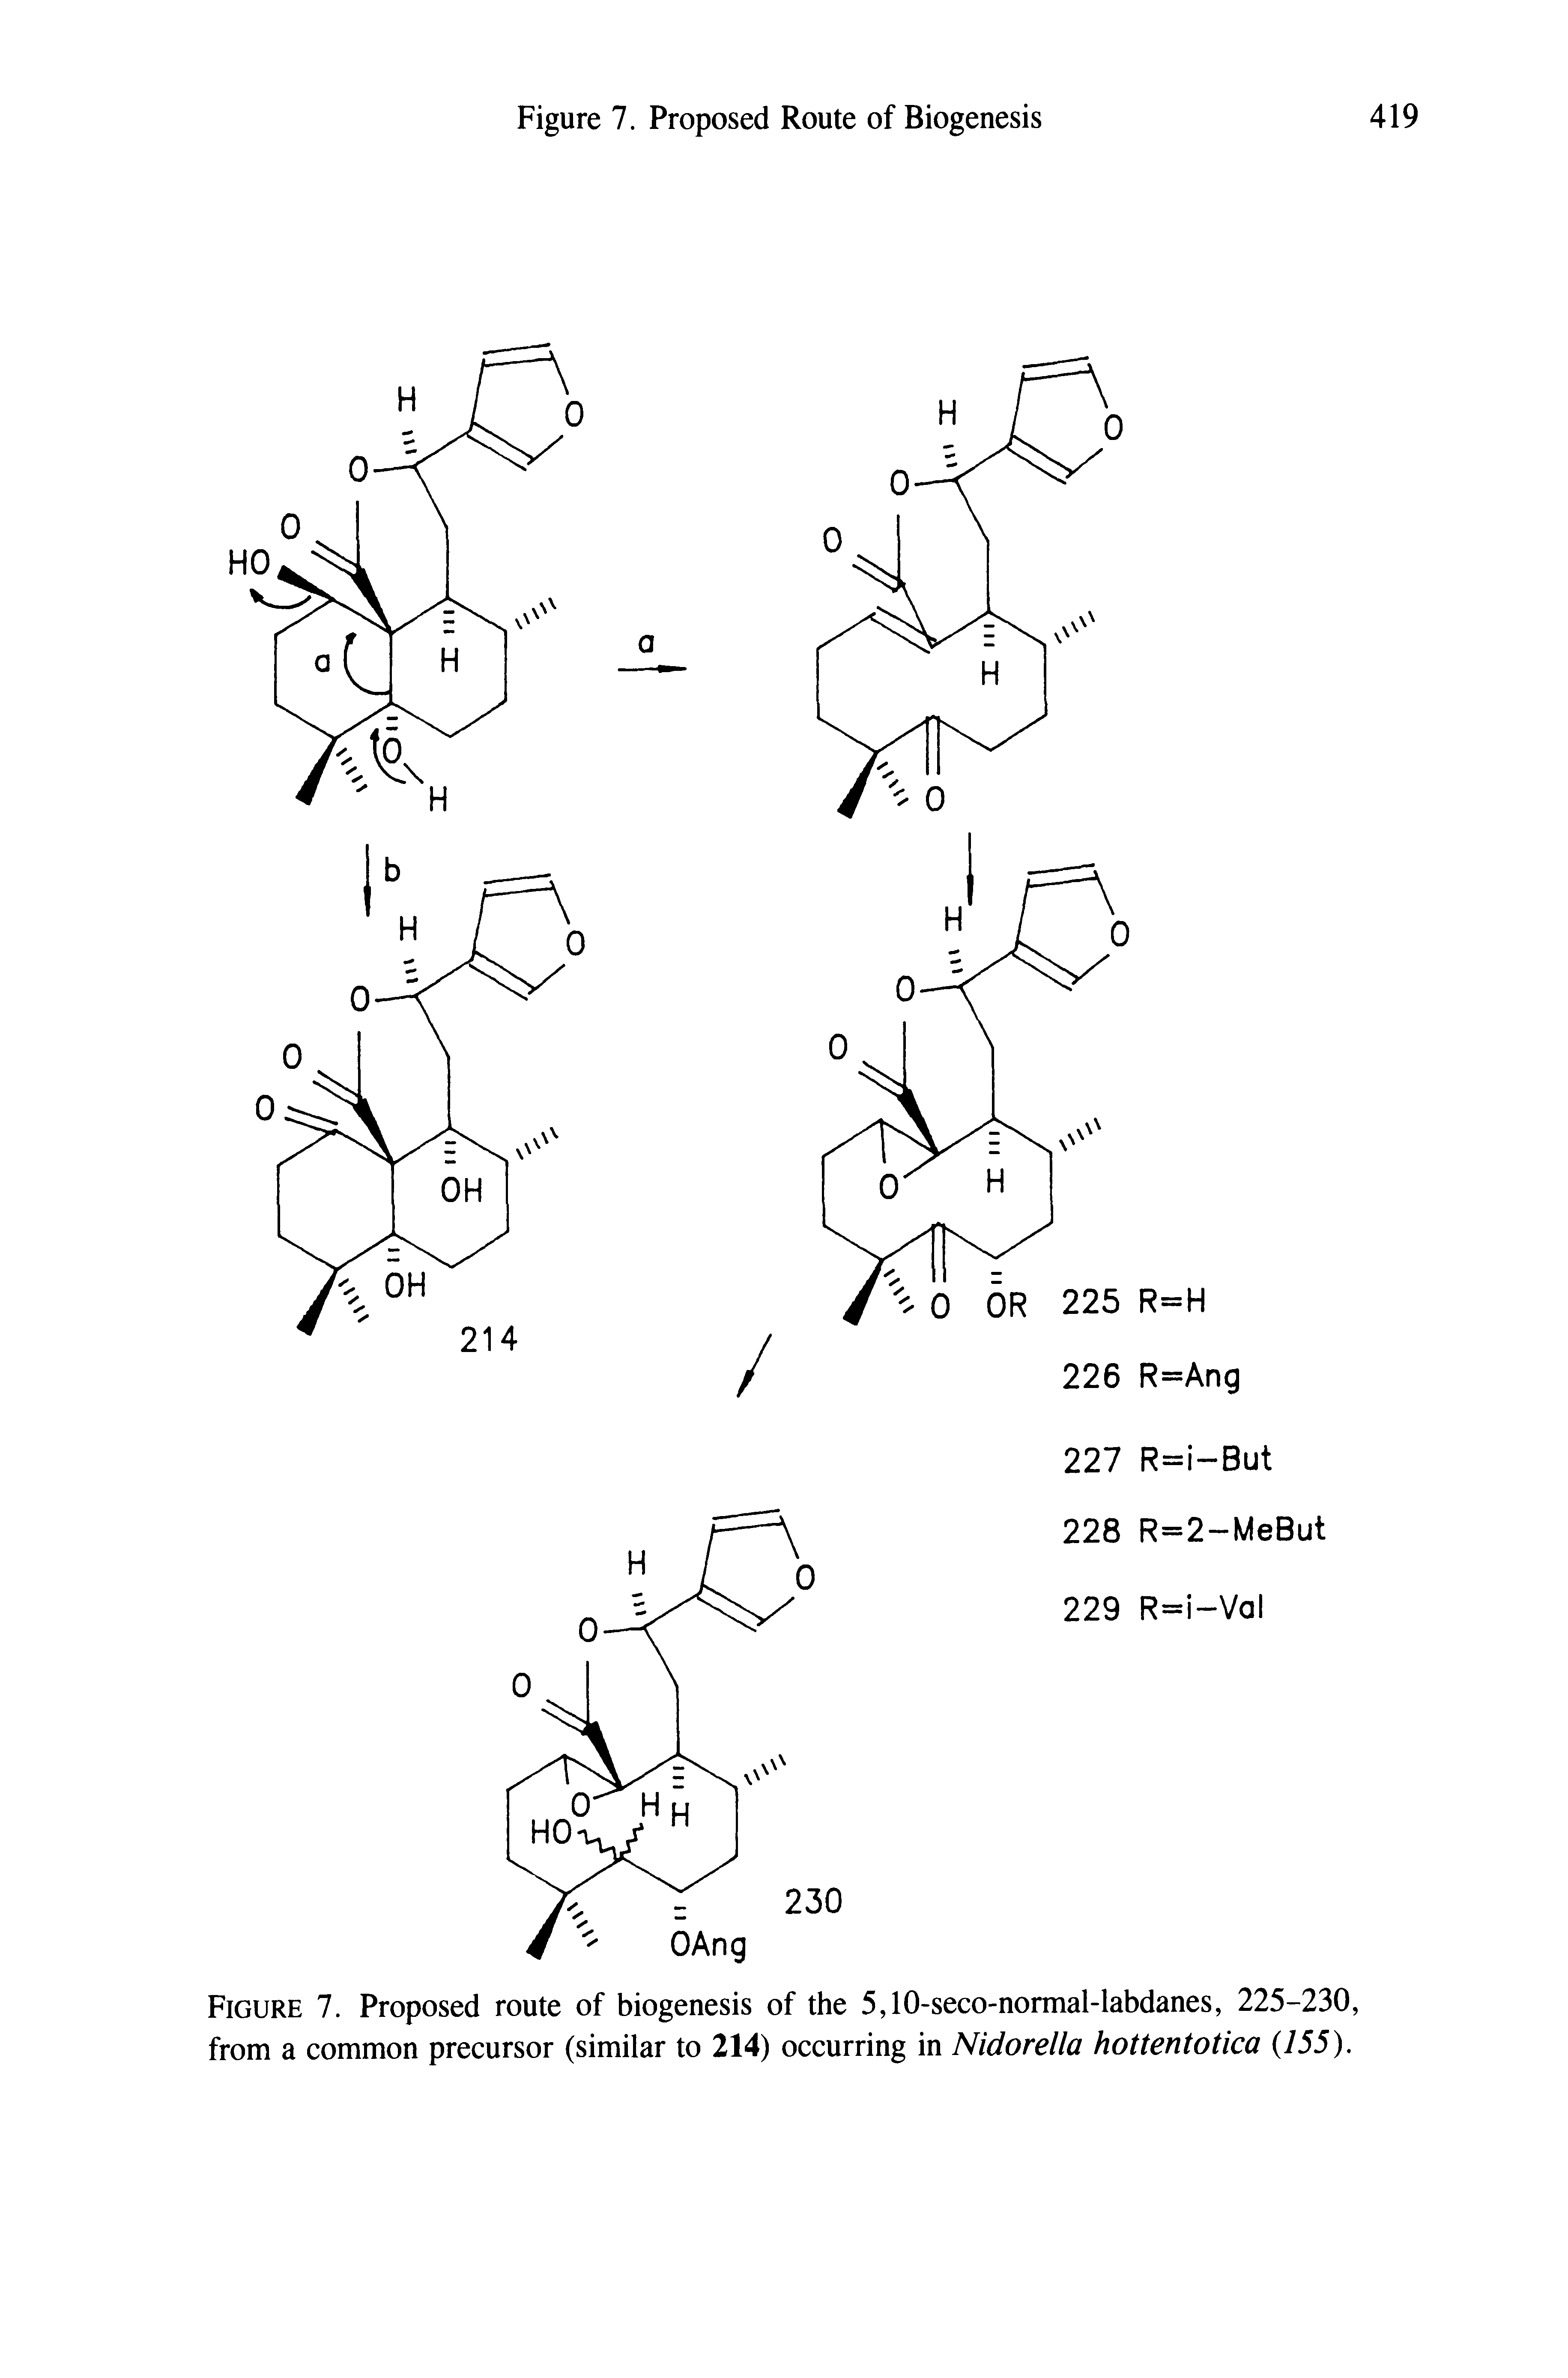 Figure 7. Proposed route of biogenesis of the 5,10-seco-normal-labdanes, 225-230, from a common precursor (similar to 214) occurring in Nidorella hottentotica 155).